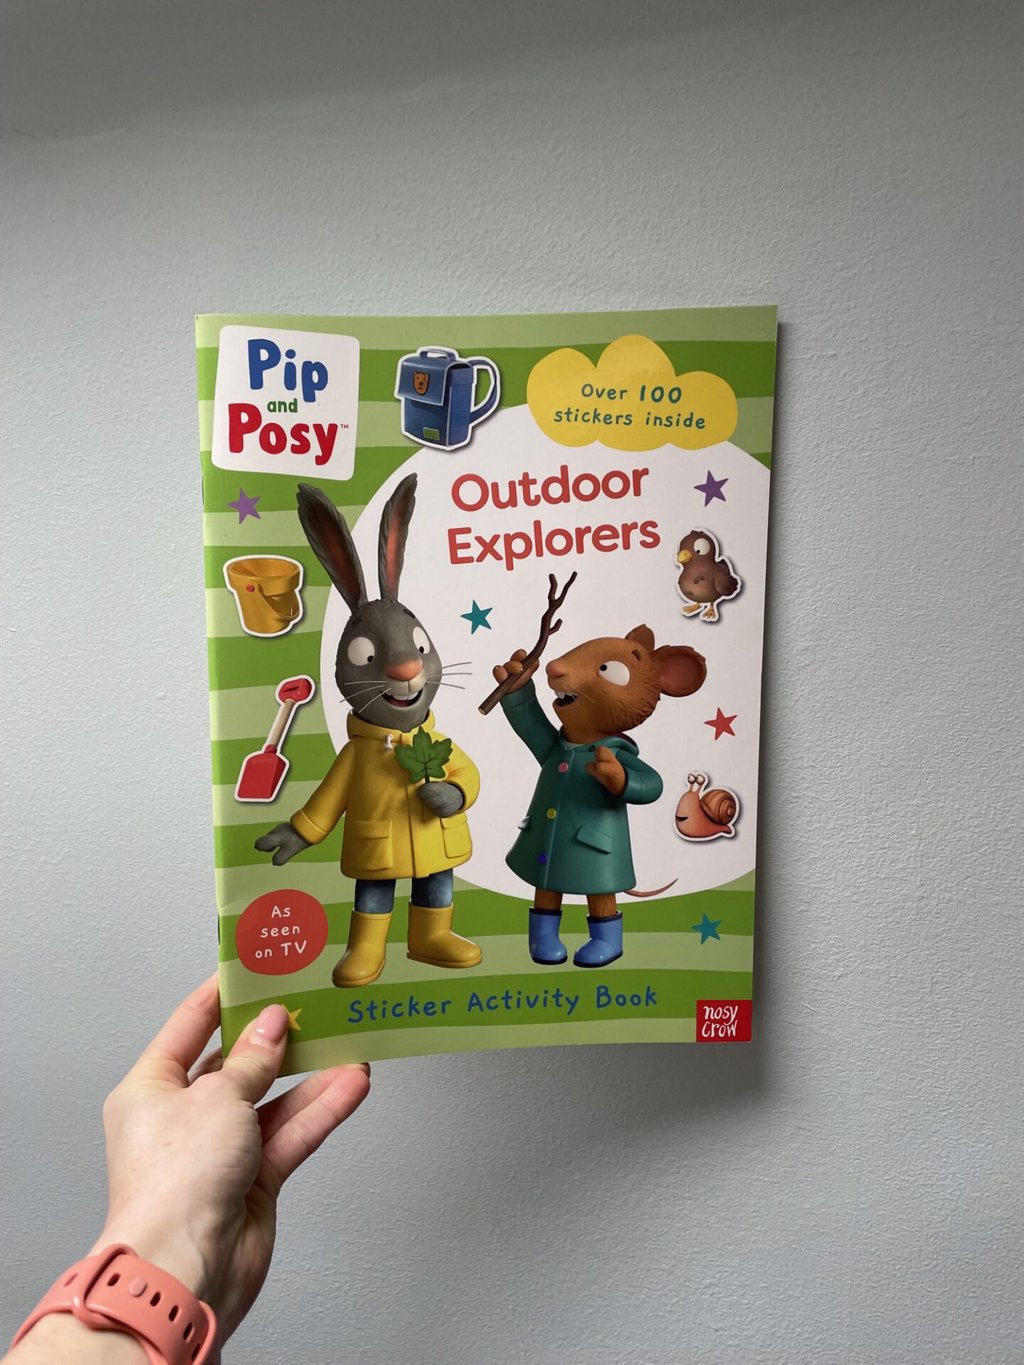 Pip and Posy – Outdoor Explorers Sticker Activity Book 